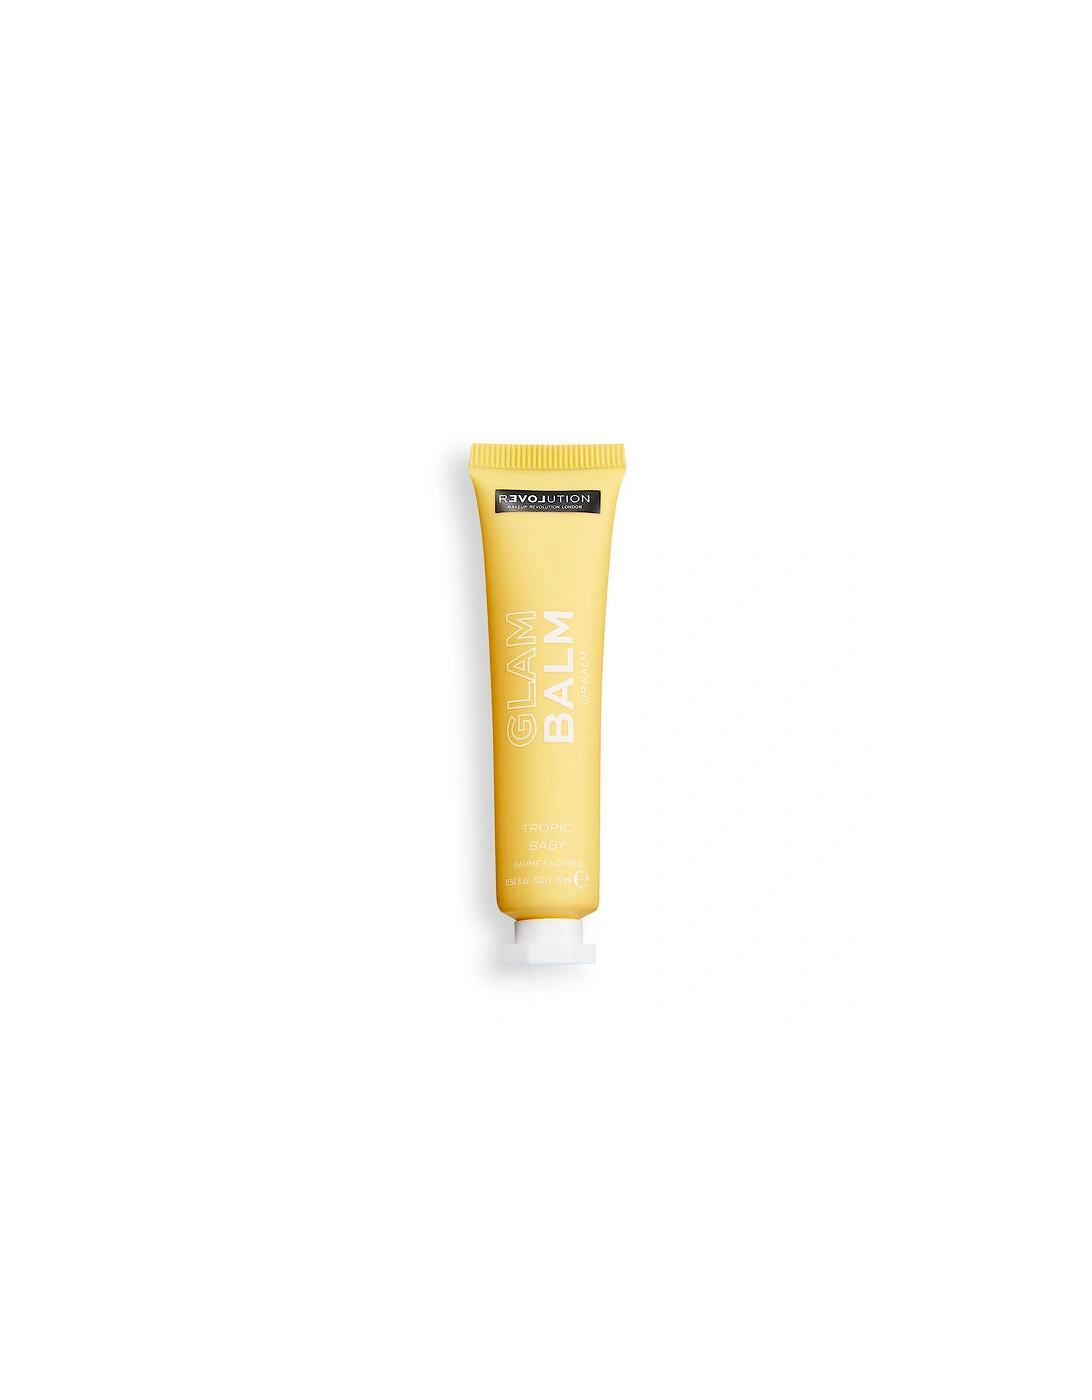 Relove by Glam Balm Lip Balm Tropic Baby Pineapple, 2 of 1